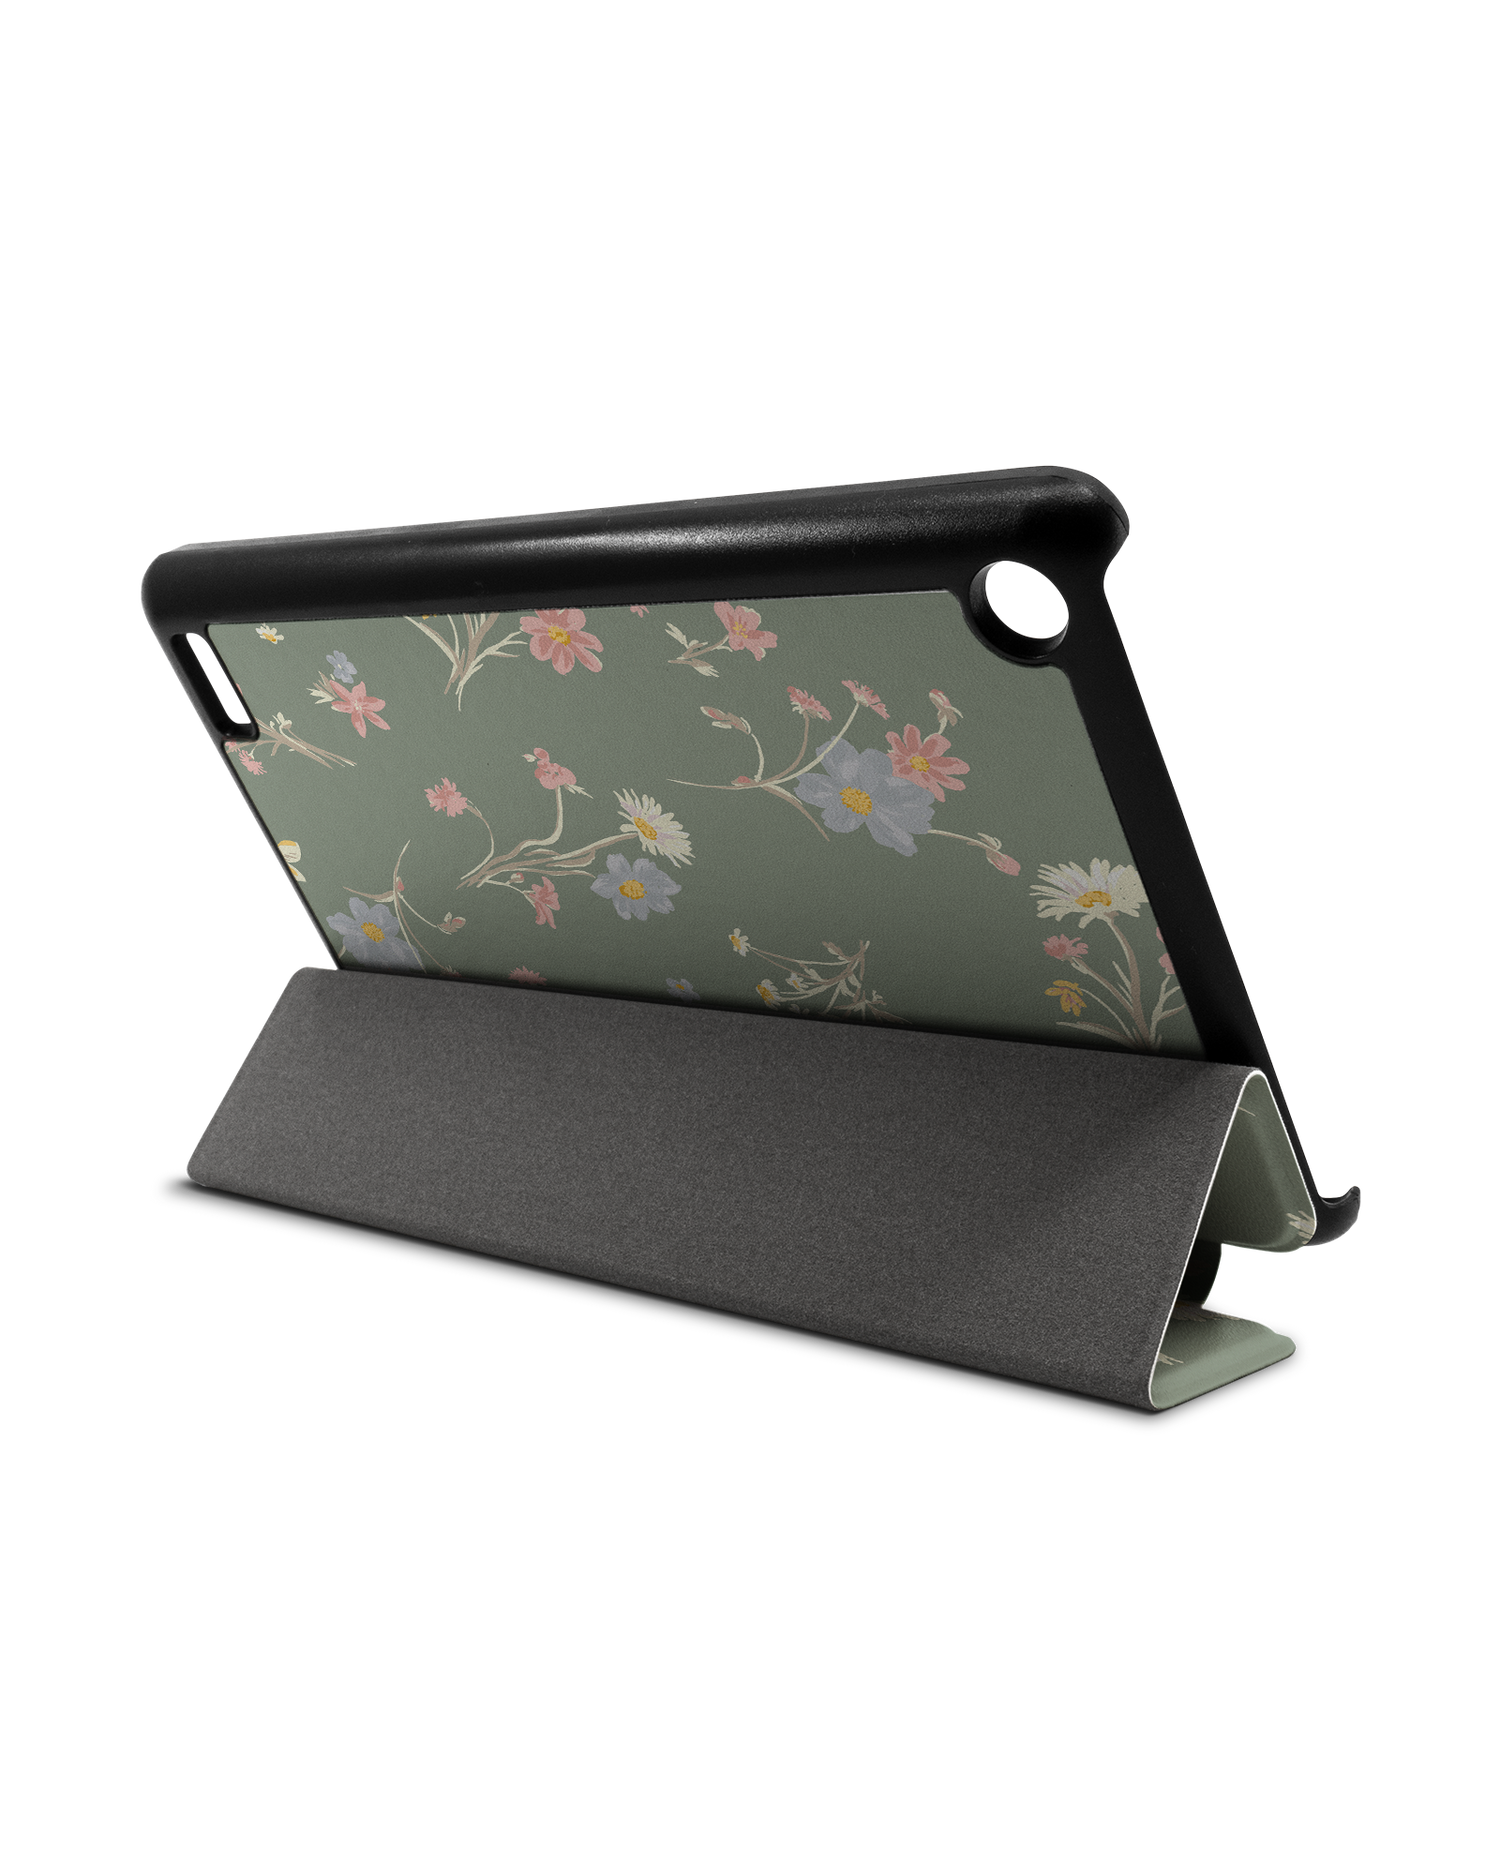 Wild Flower Sprigs Tablet Smart Case for Amazon Fire 7: Used as Stand